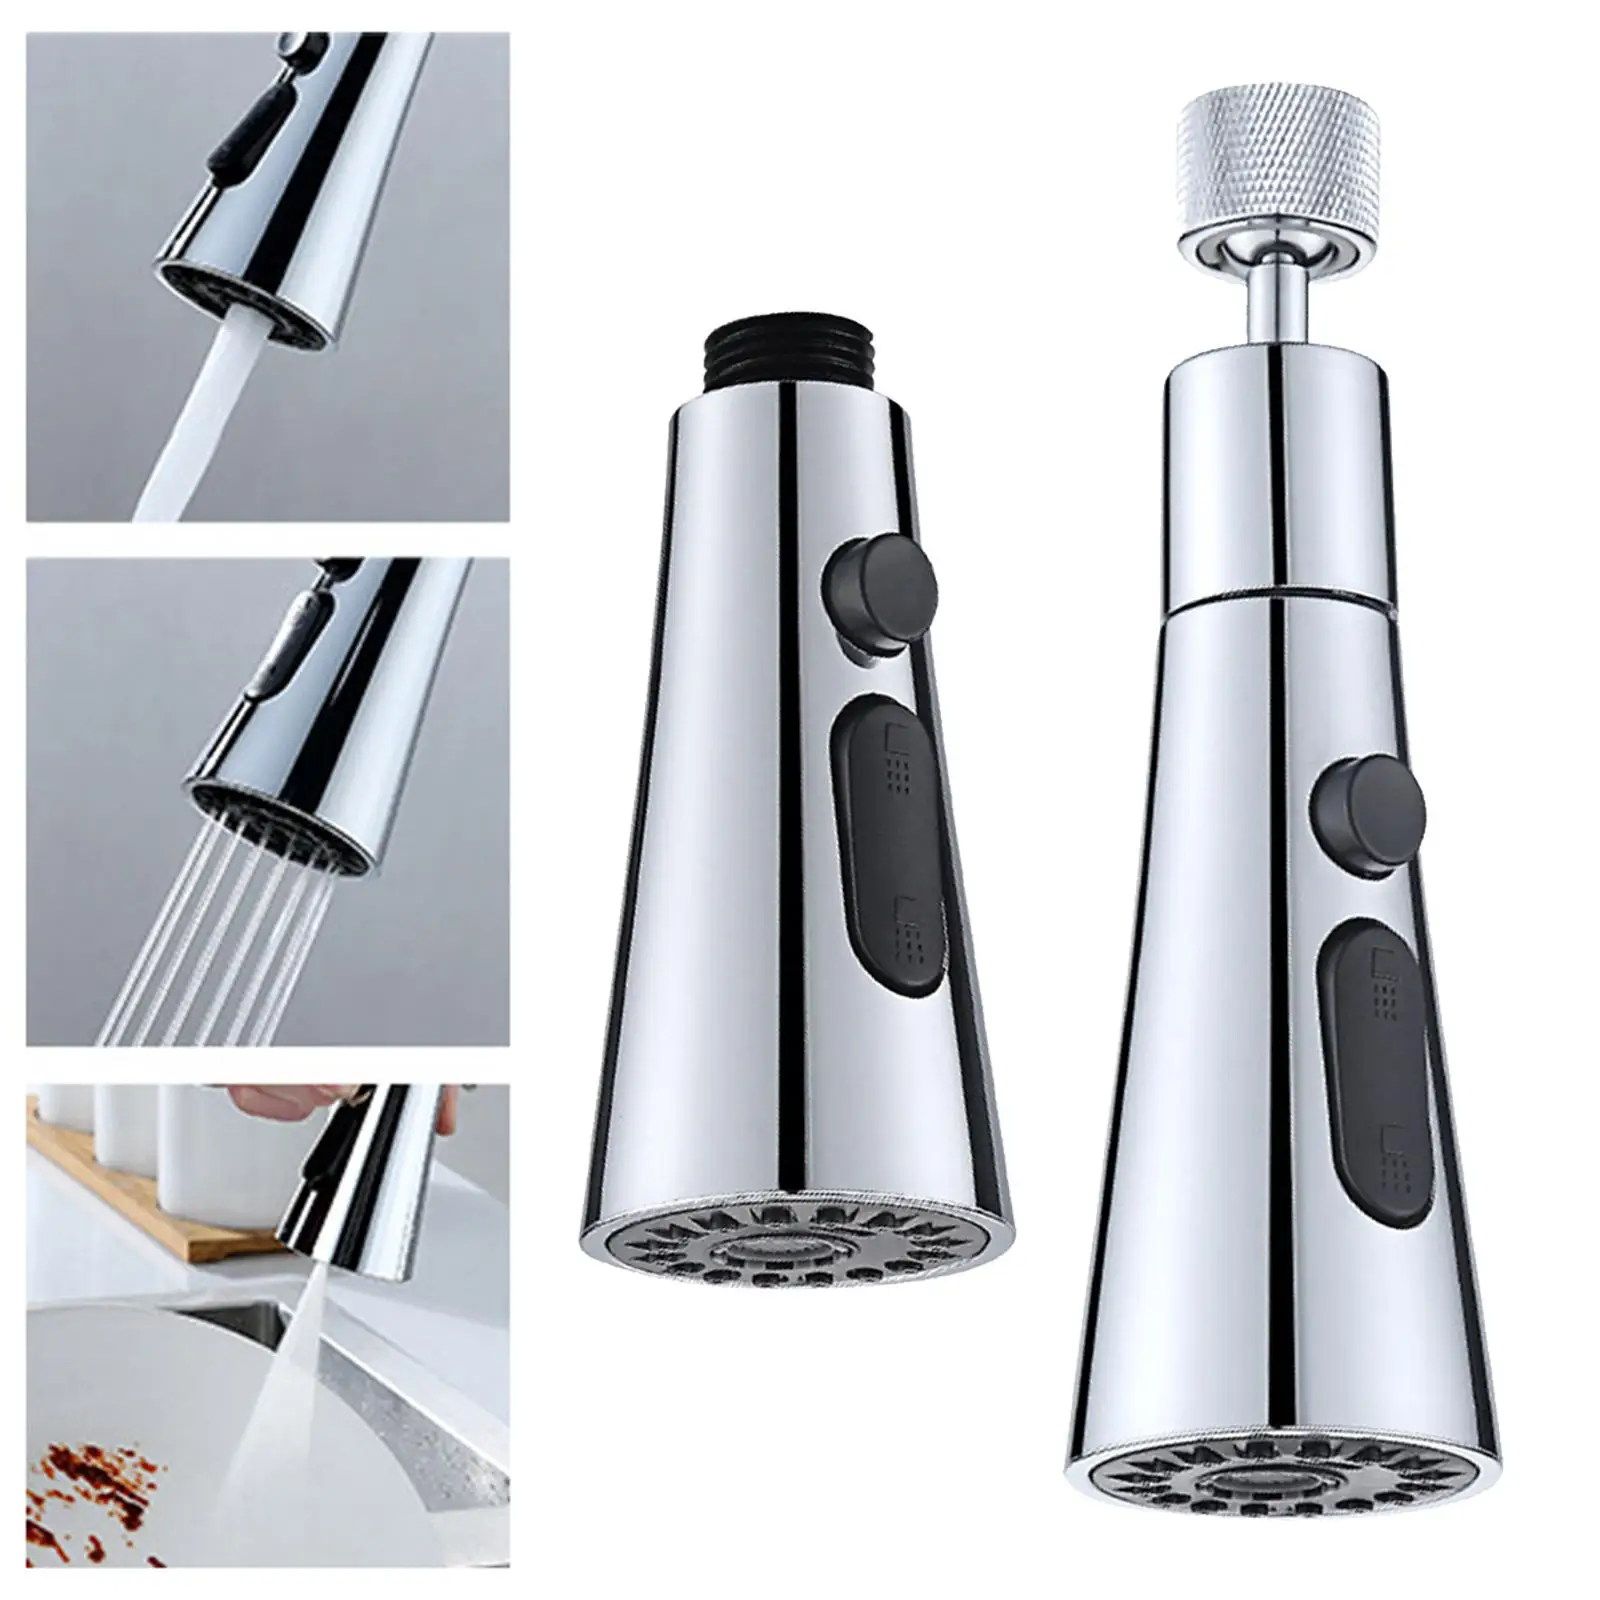 Rotatable Faucet Sprayer Attachment Faucet Aerator Kitchen Sink Accessories Kitchen Sink Faucet for Restaurant Kitchen Home